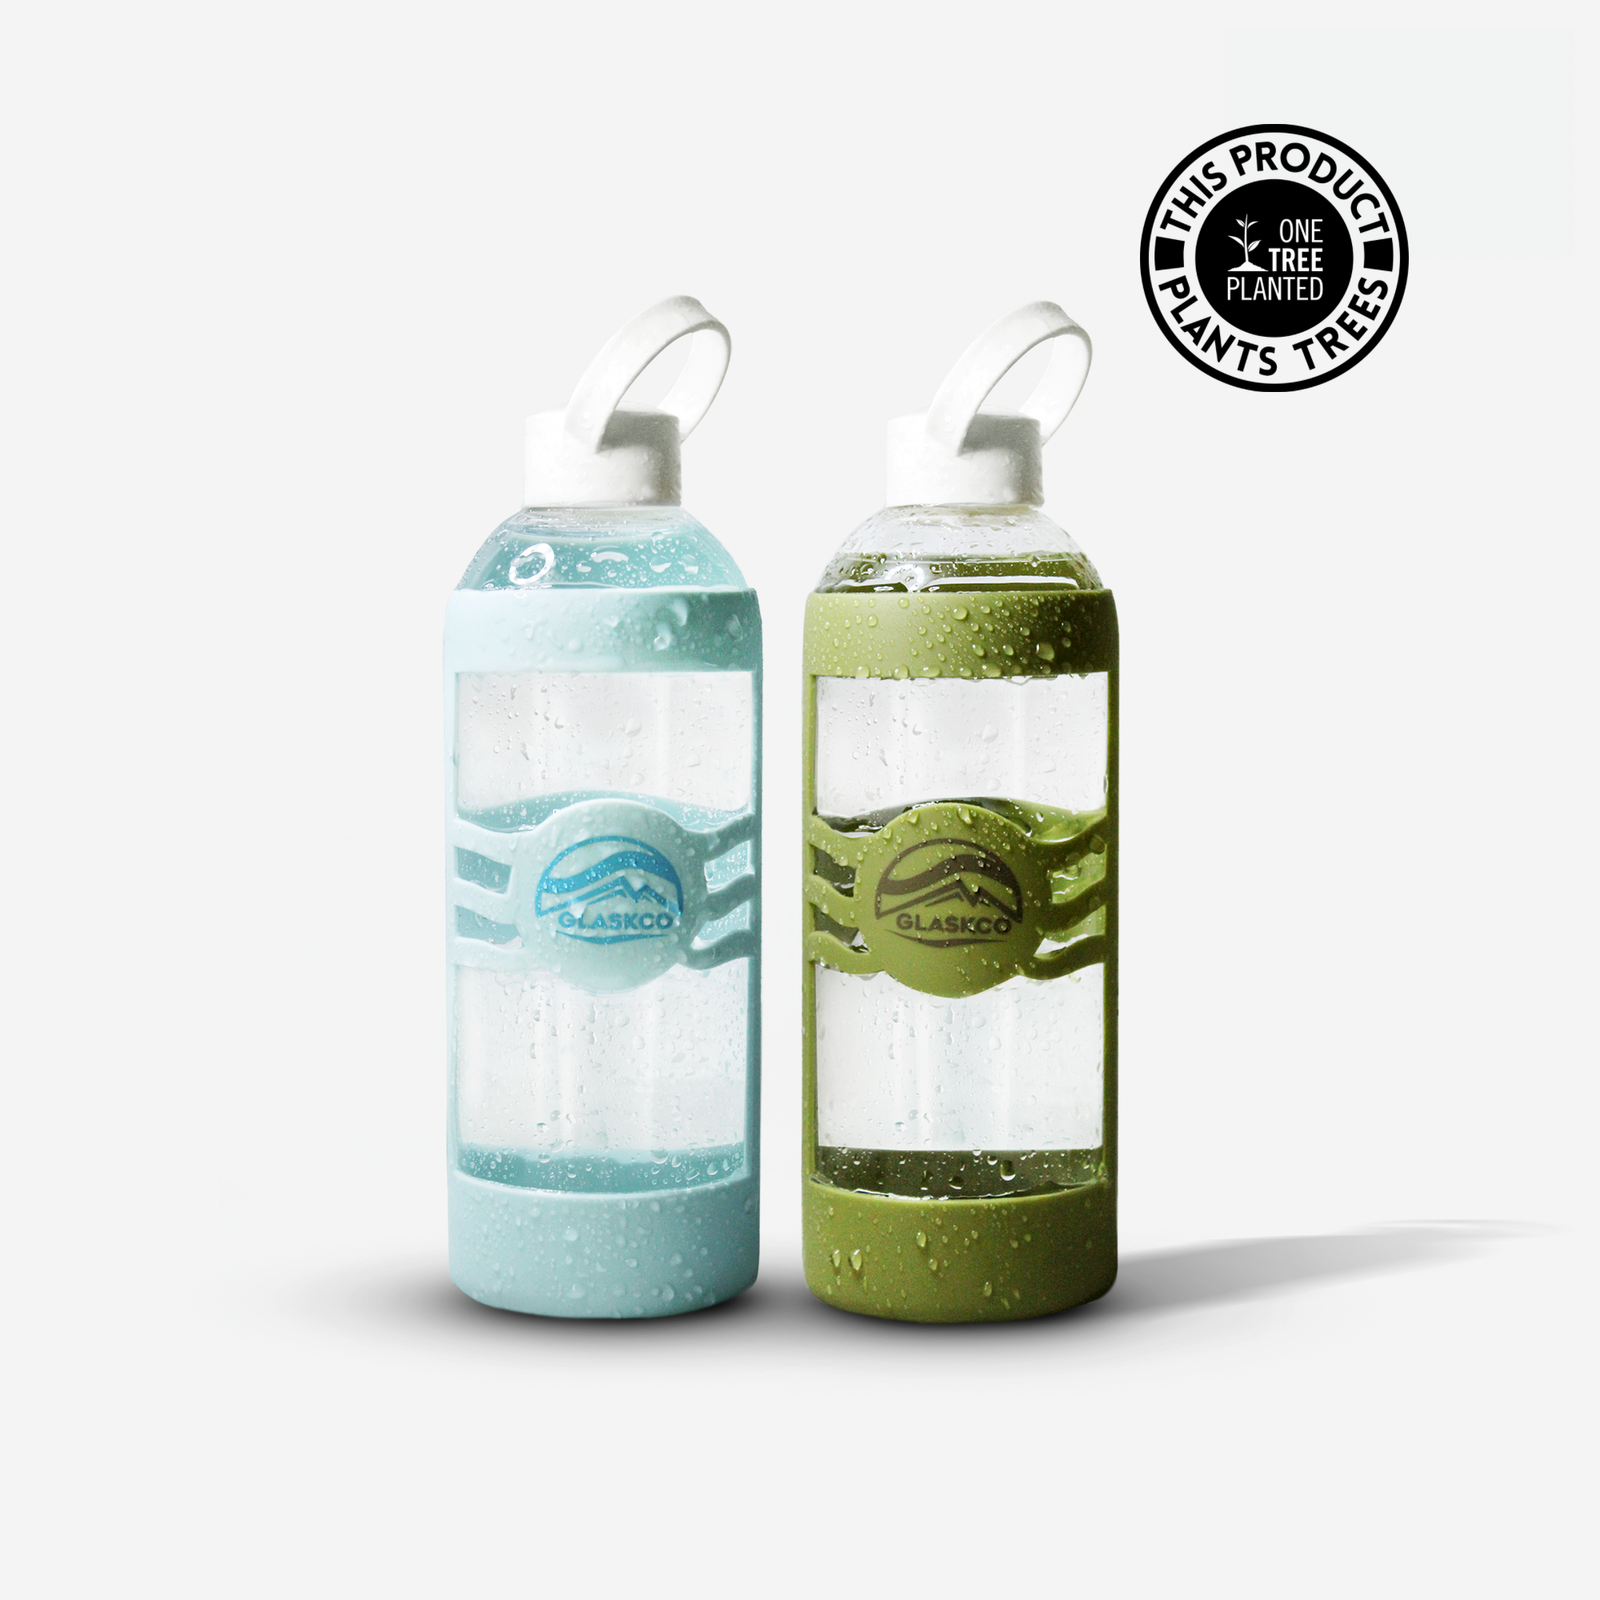 Two elegant Glaskco glass water bottles stand side by side. The bottle on the left boasts a refreshing turquoise gradient while the right one showcases a vibrant green gradient, both adorned with water droplets to emphasize their coolness. Each bottle features a distinct color-matched Glaskco logo and is topped with a white loop handle. A black emblem in the top right states: "This Product Plants One Tree"